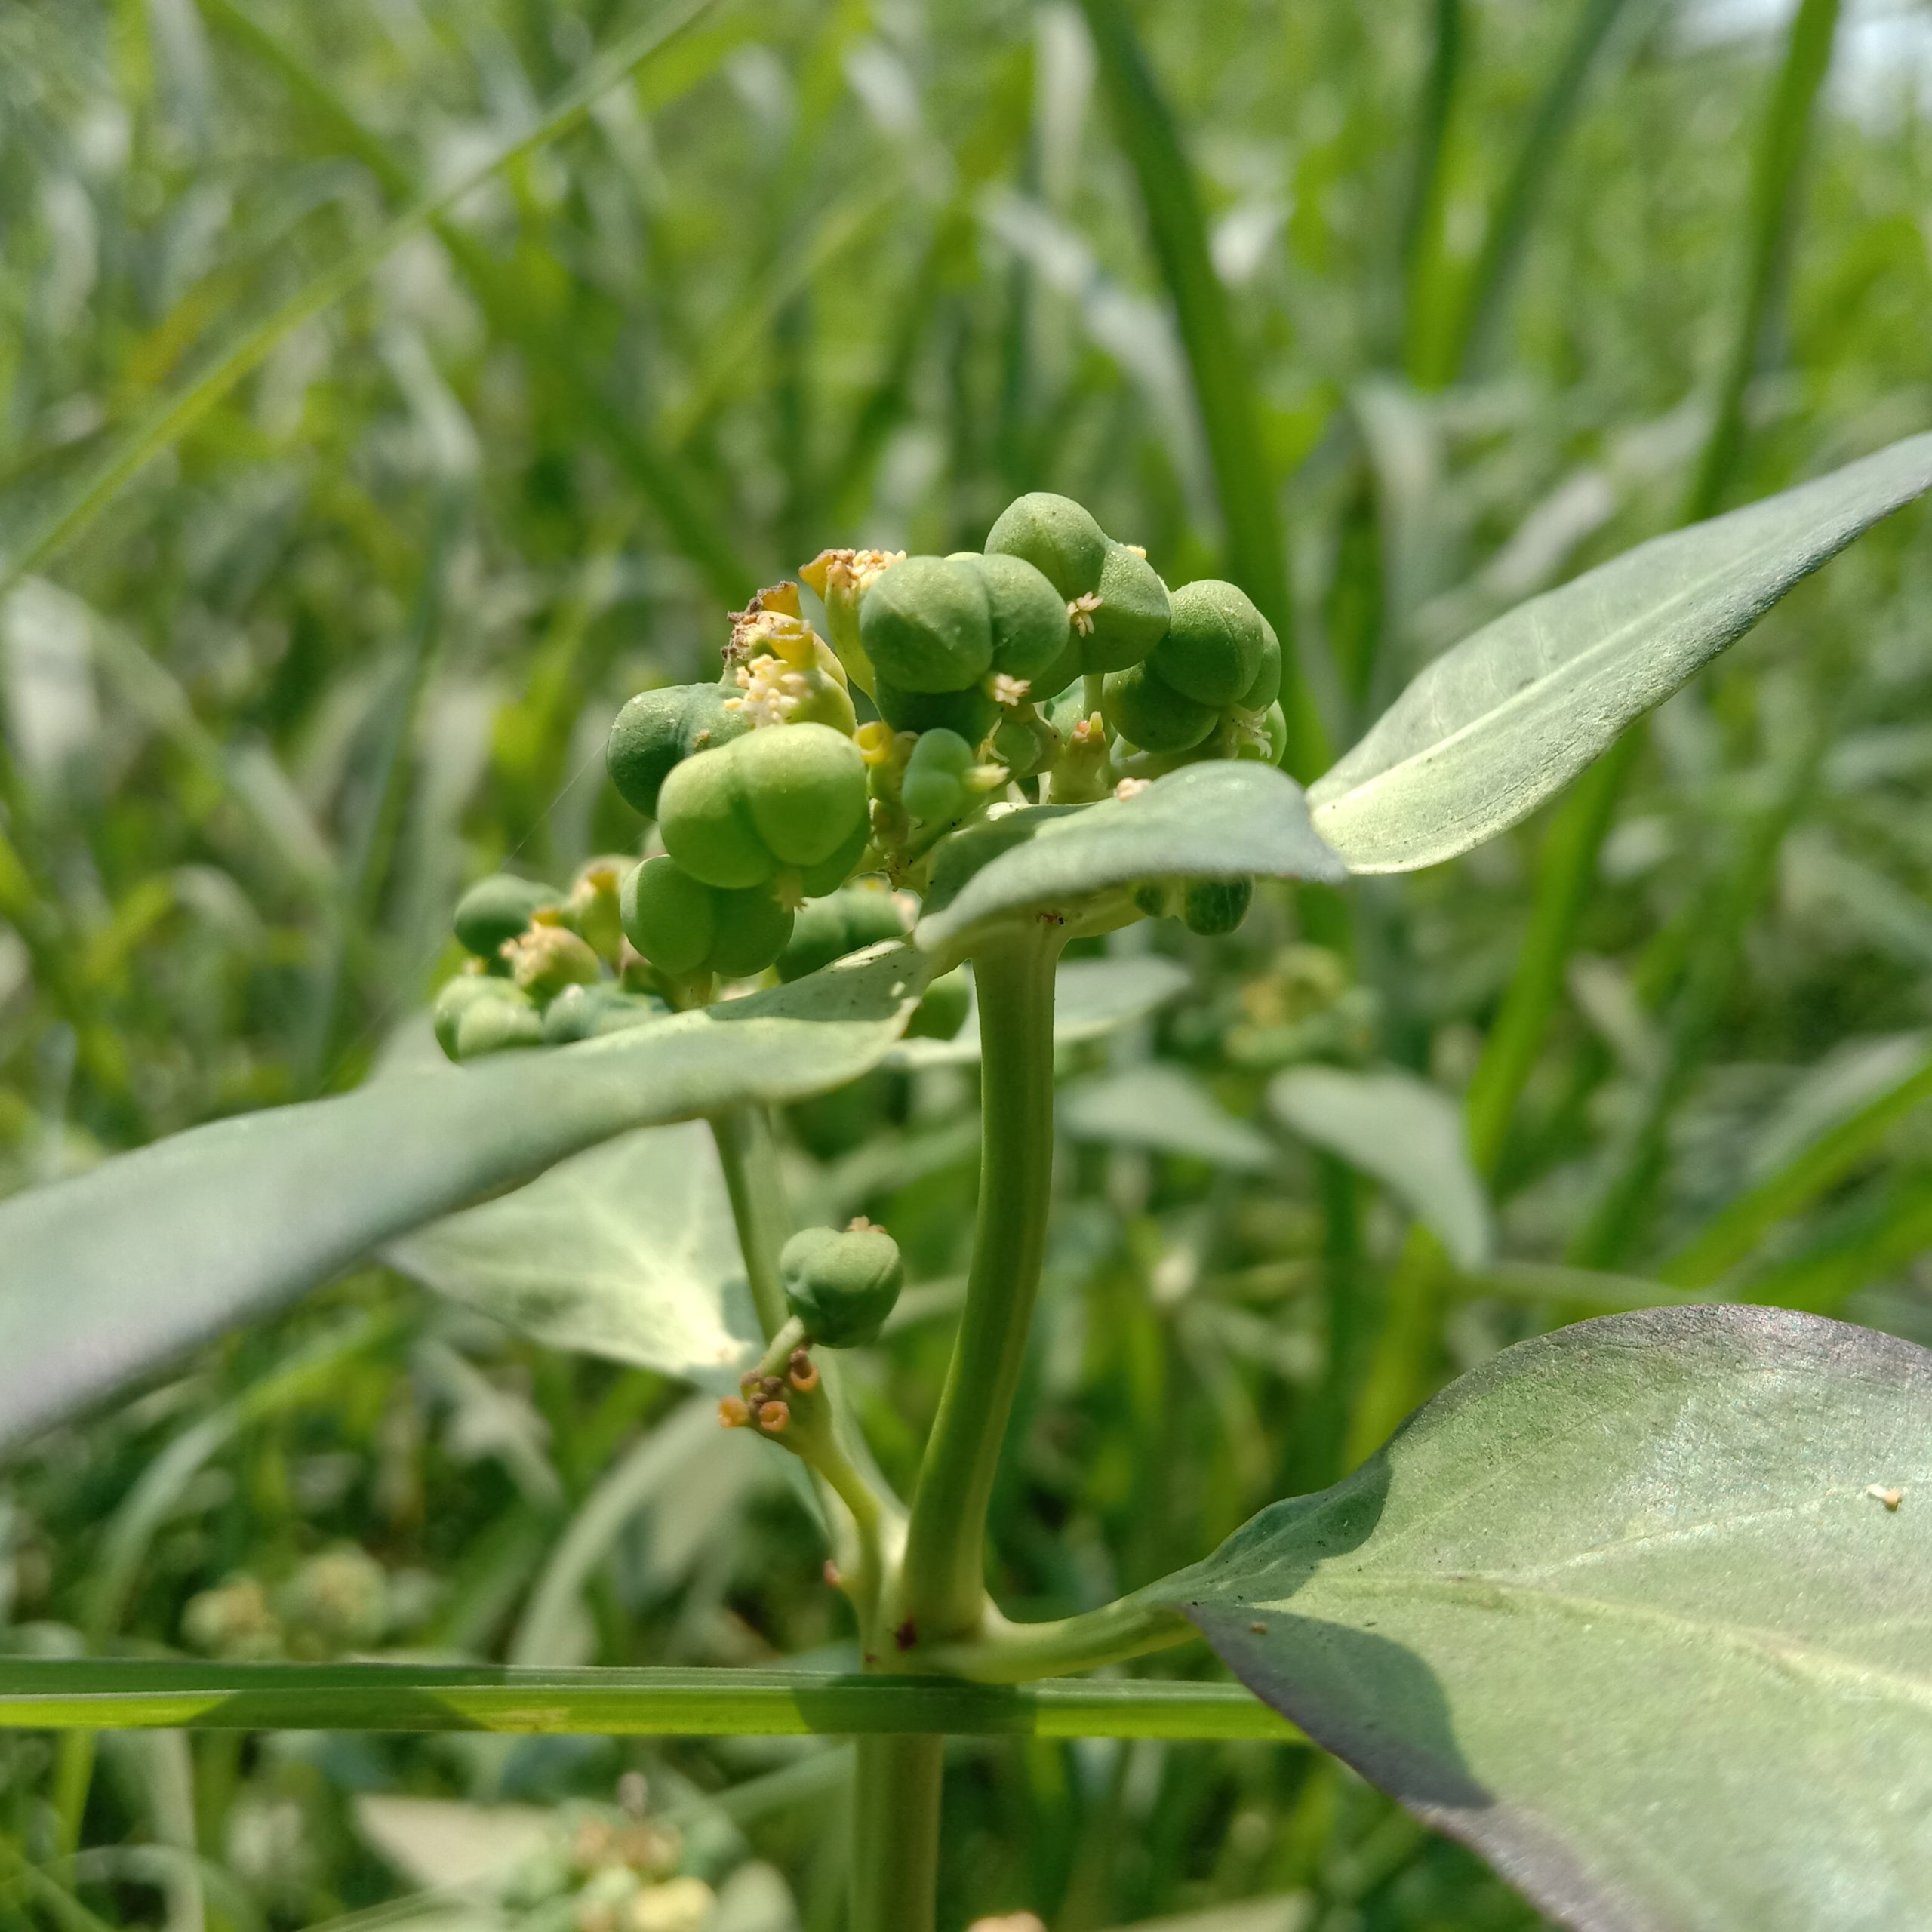 Seed buds of a plant